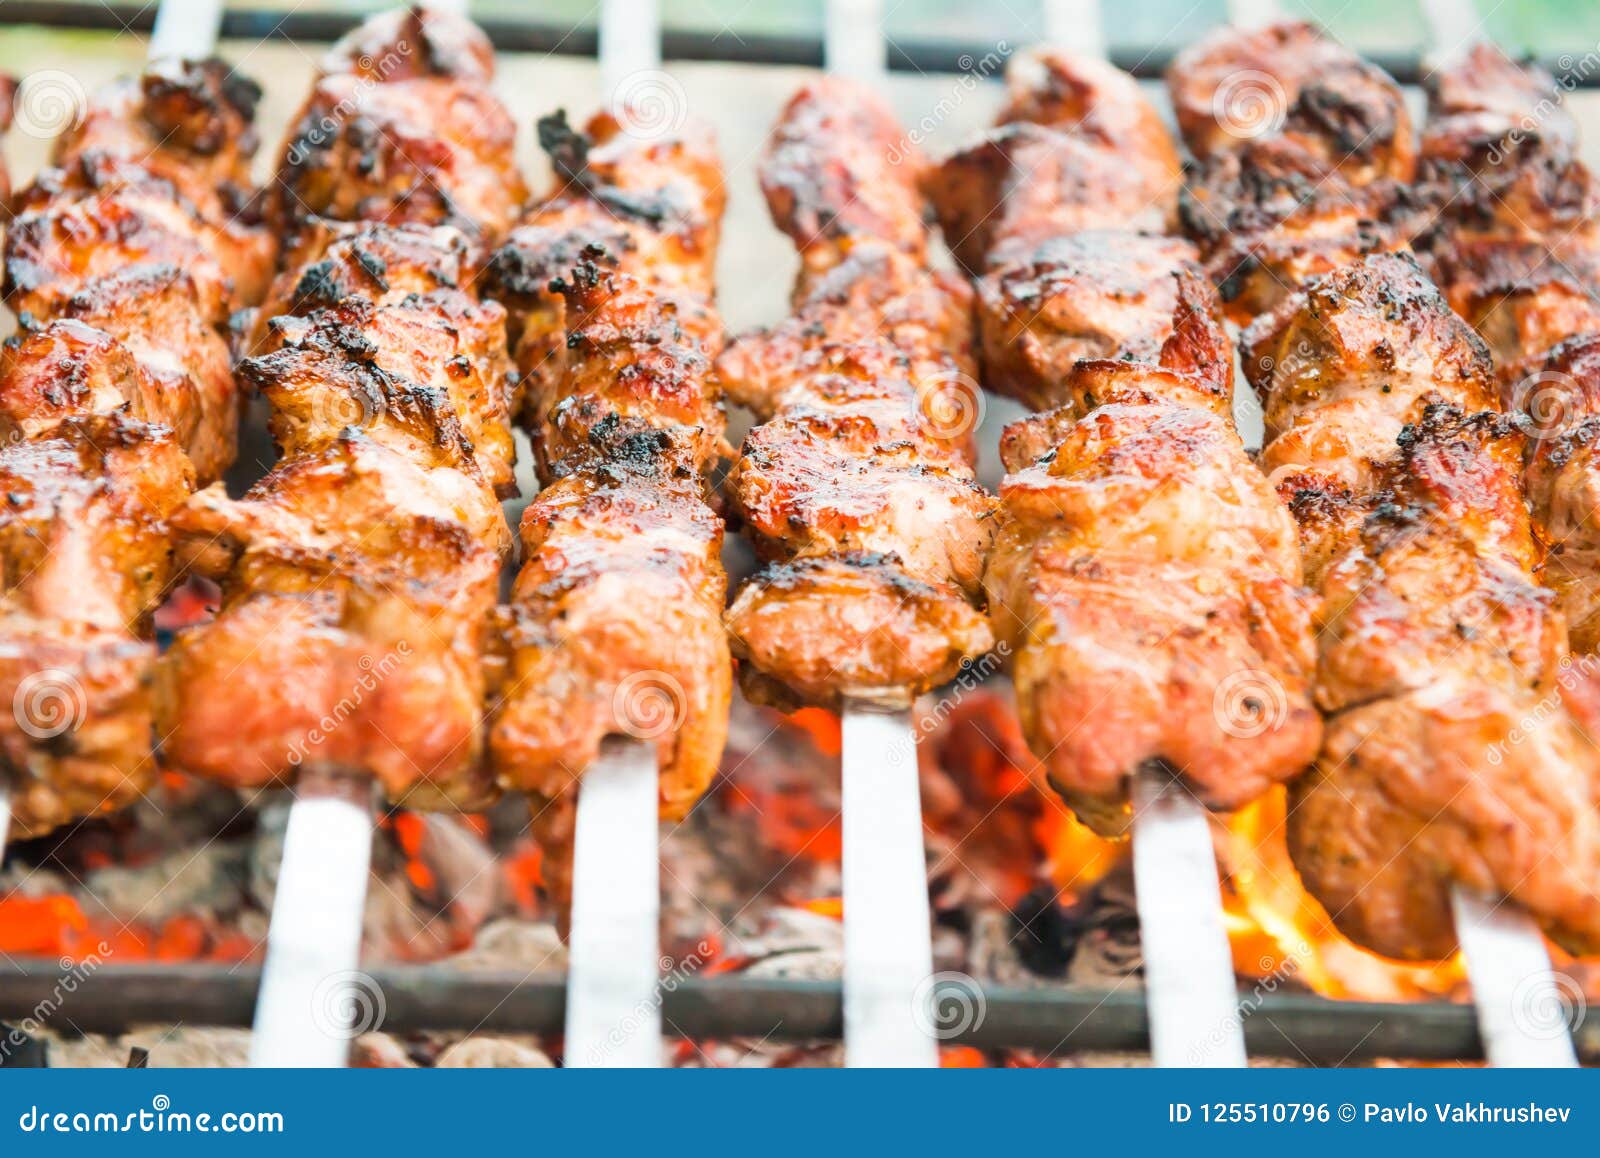 Barbecue with Rilled Kebab Meat Stock Photo - Image of flame, cook ...